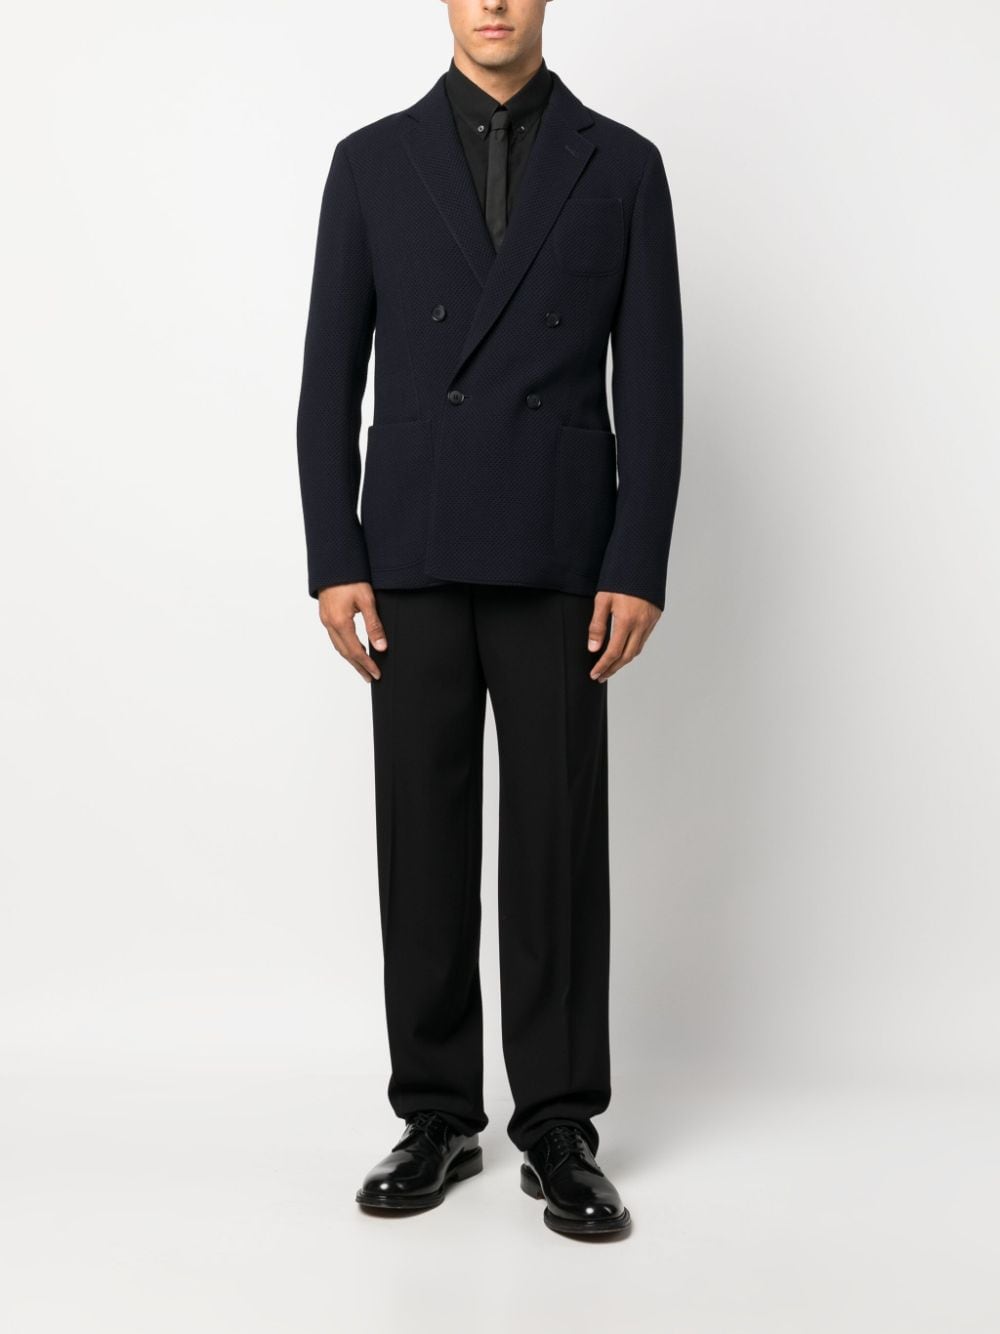 GIORGIO ARMANI Navy Blue Wool Double-Breasted Blazer for Men